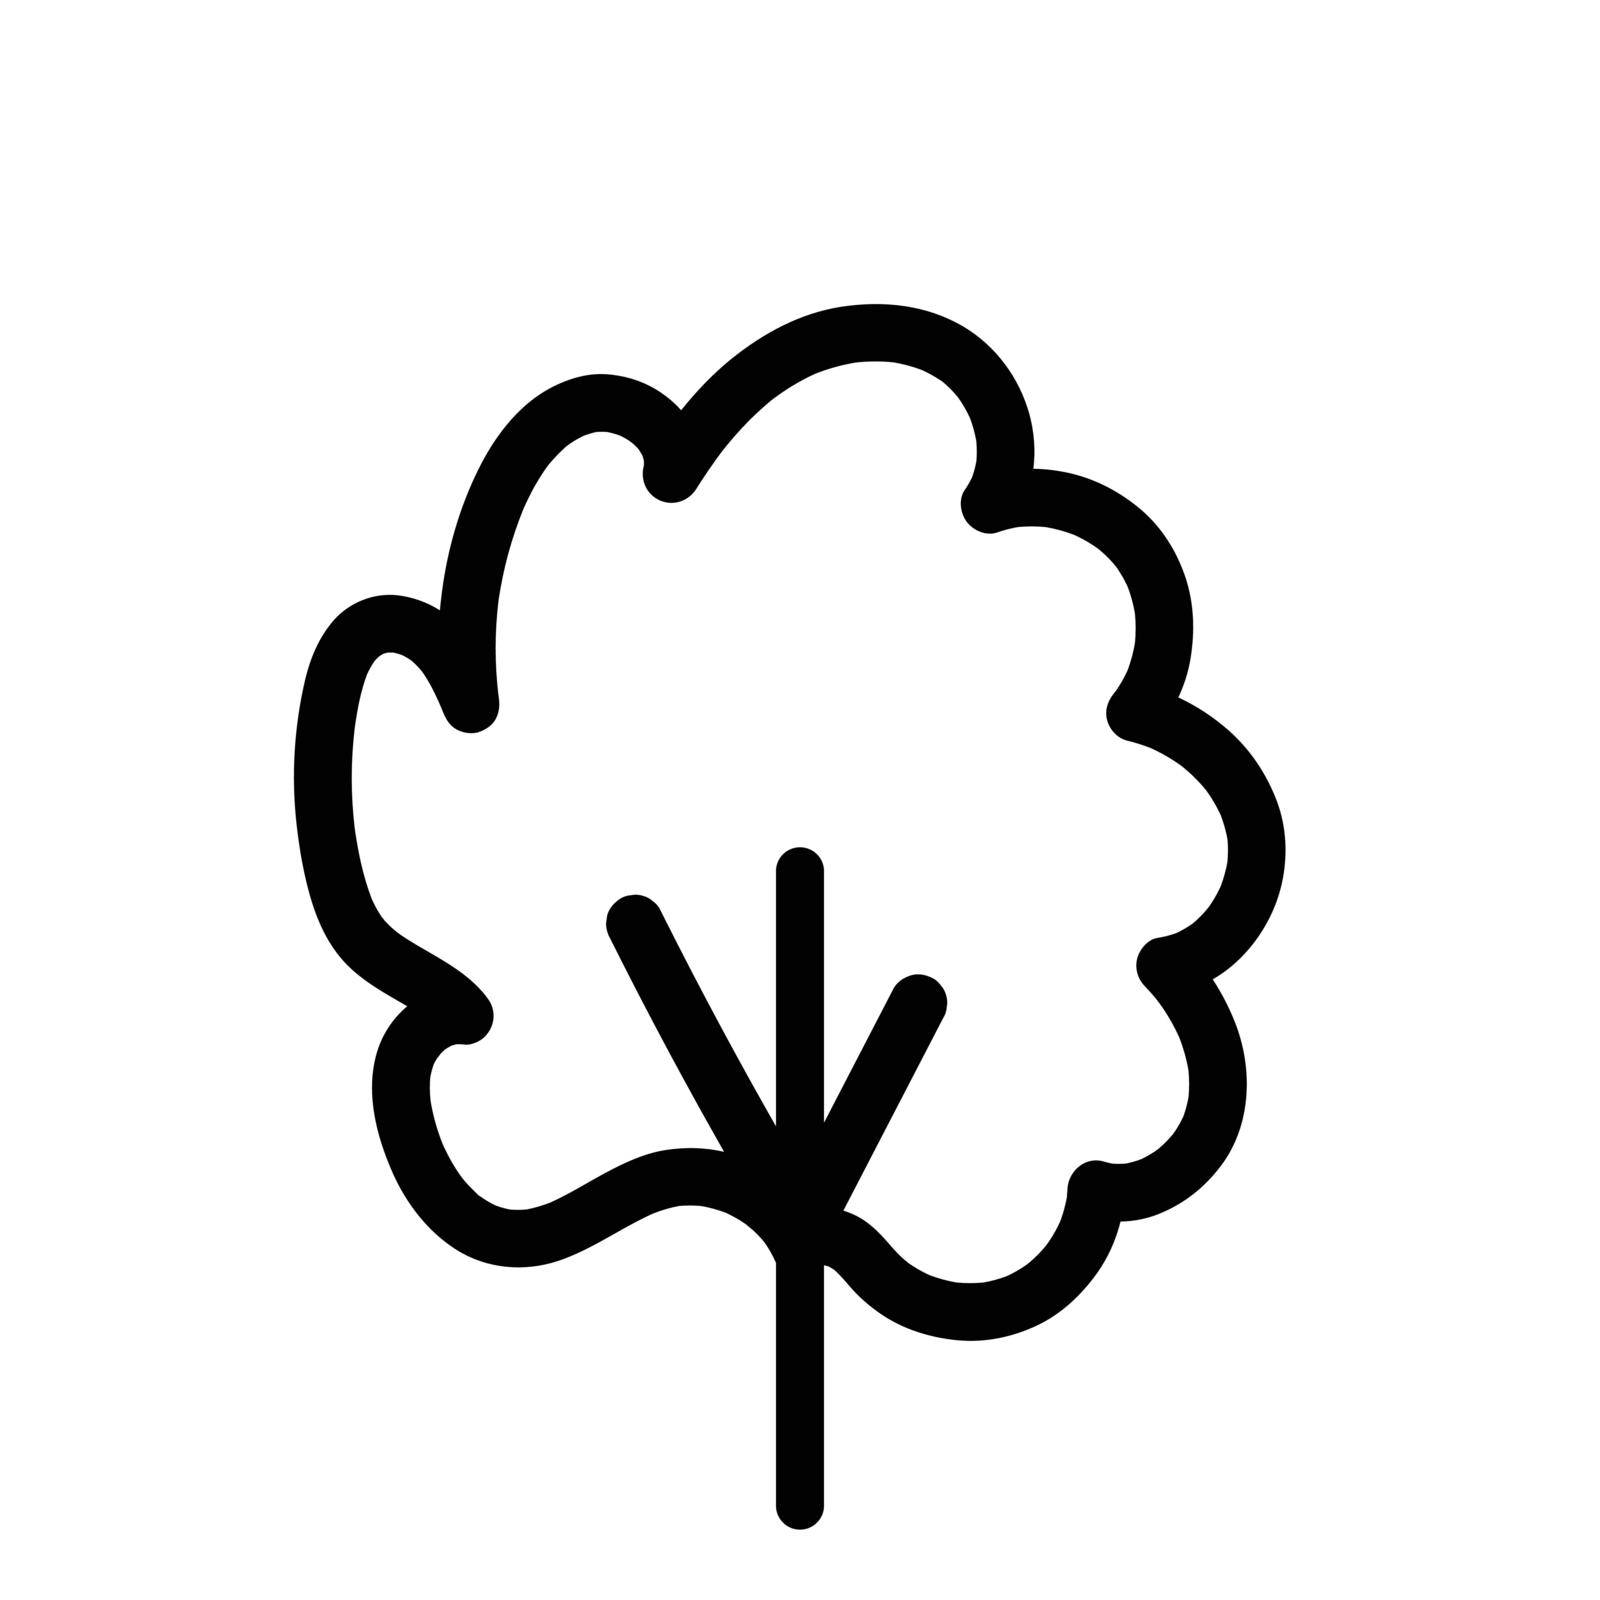 Black and white template tree icon. Vector symbol sign isolated on white background. Trees flat line icons set. Plants, landscape design. Business idea concept.